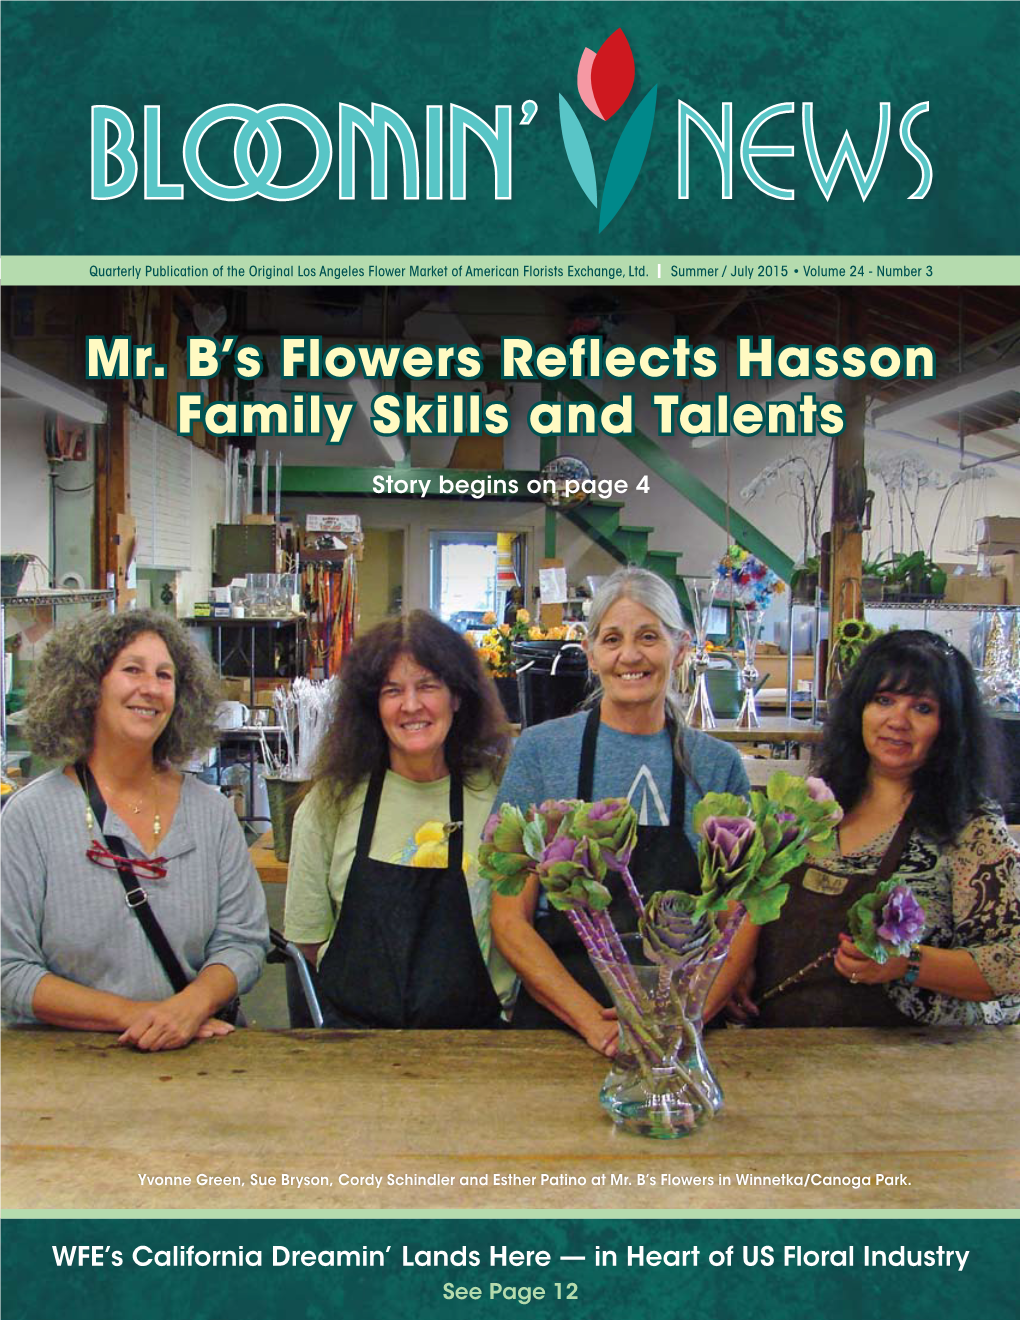 Mr. B's Flowers Reflects Hasson Family Skills and Talents